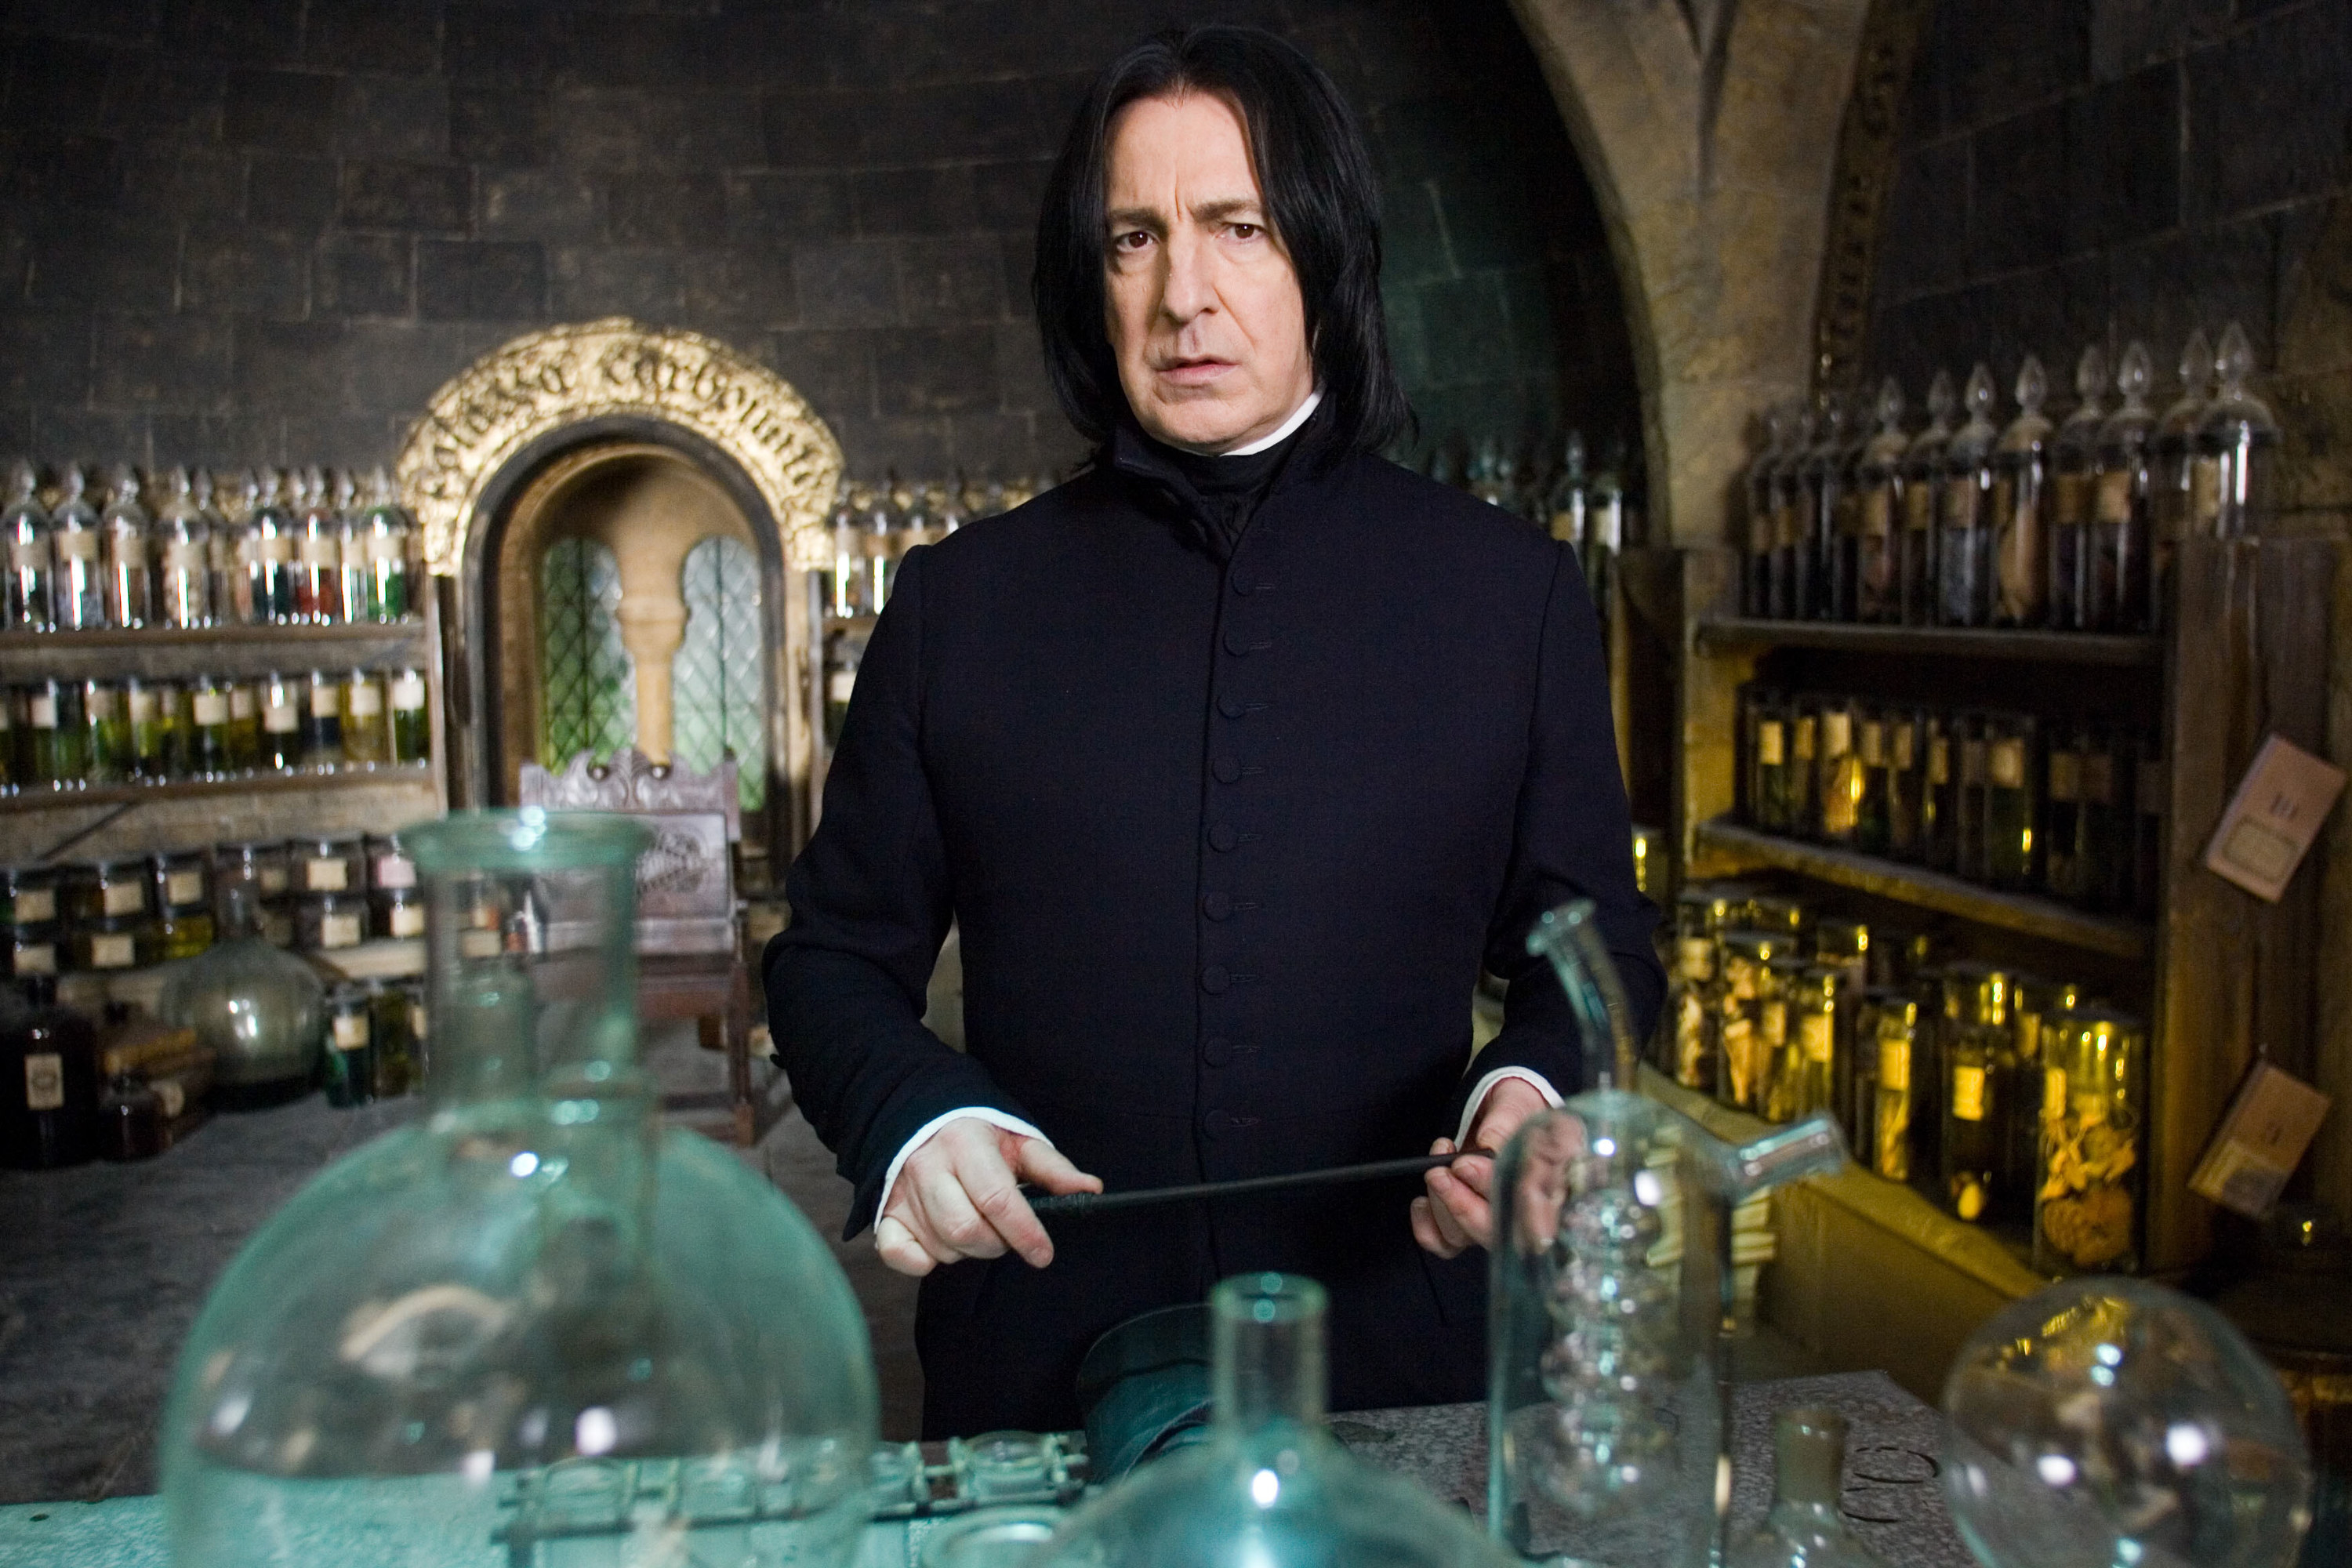 Alan Rickman Professor Snape from &quot;Harry Potter&quot; holding his wand